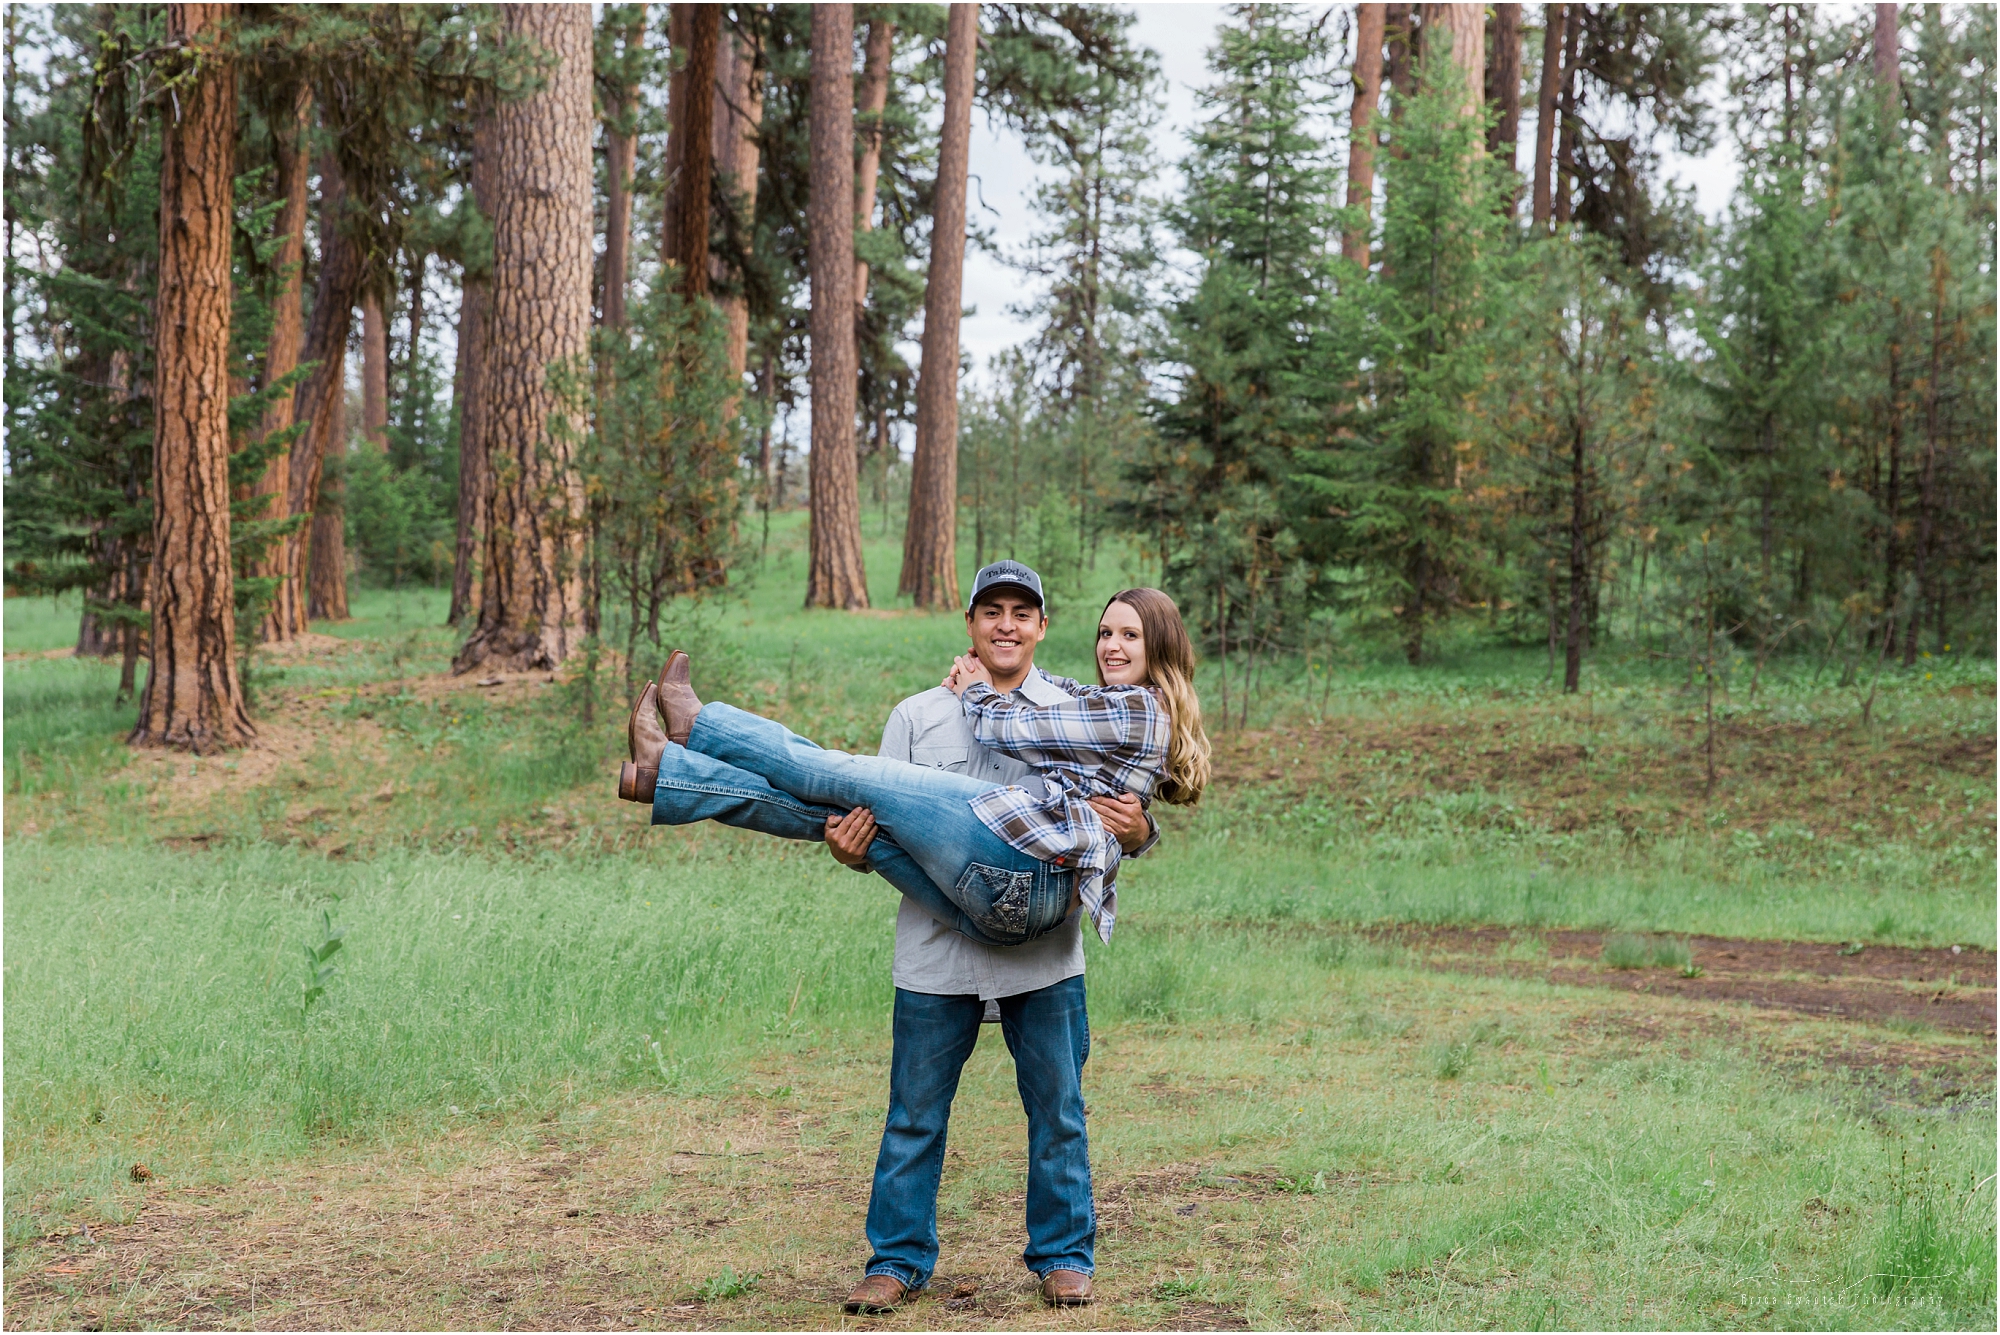 An Oregon outdoor adventure engagement session in the Ochoco Mountains near Prineville. | Erica Swantek Photography